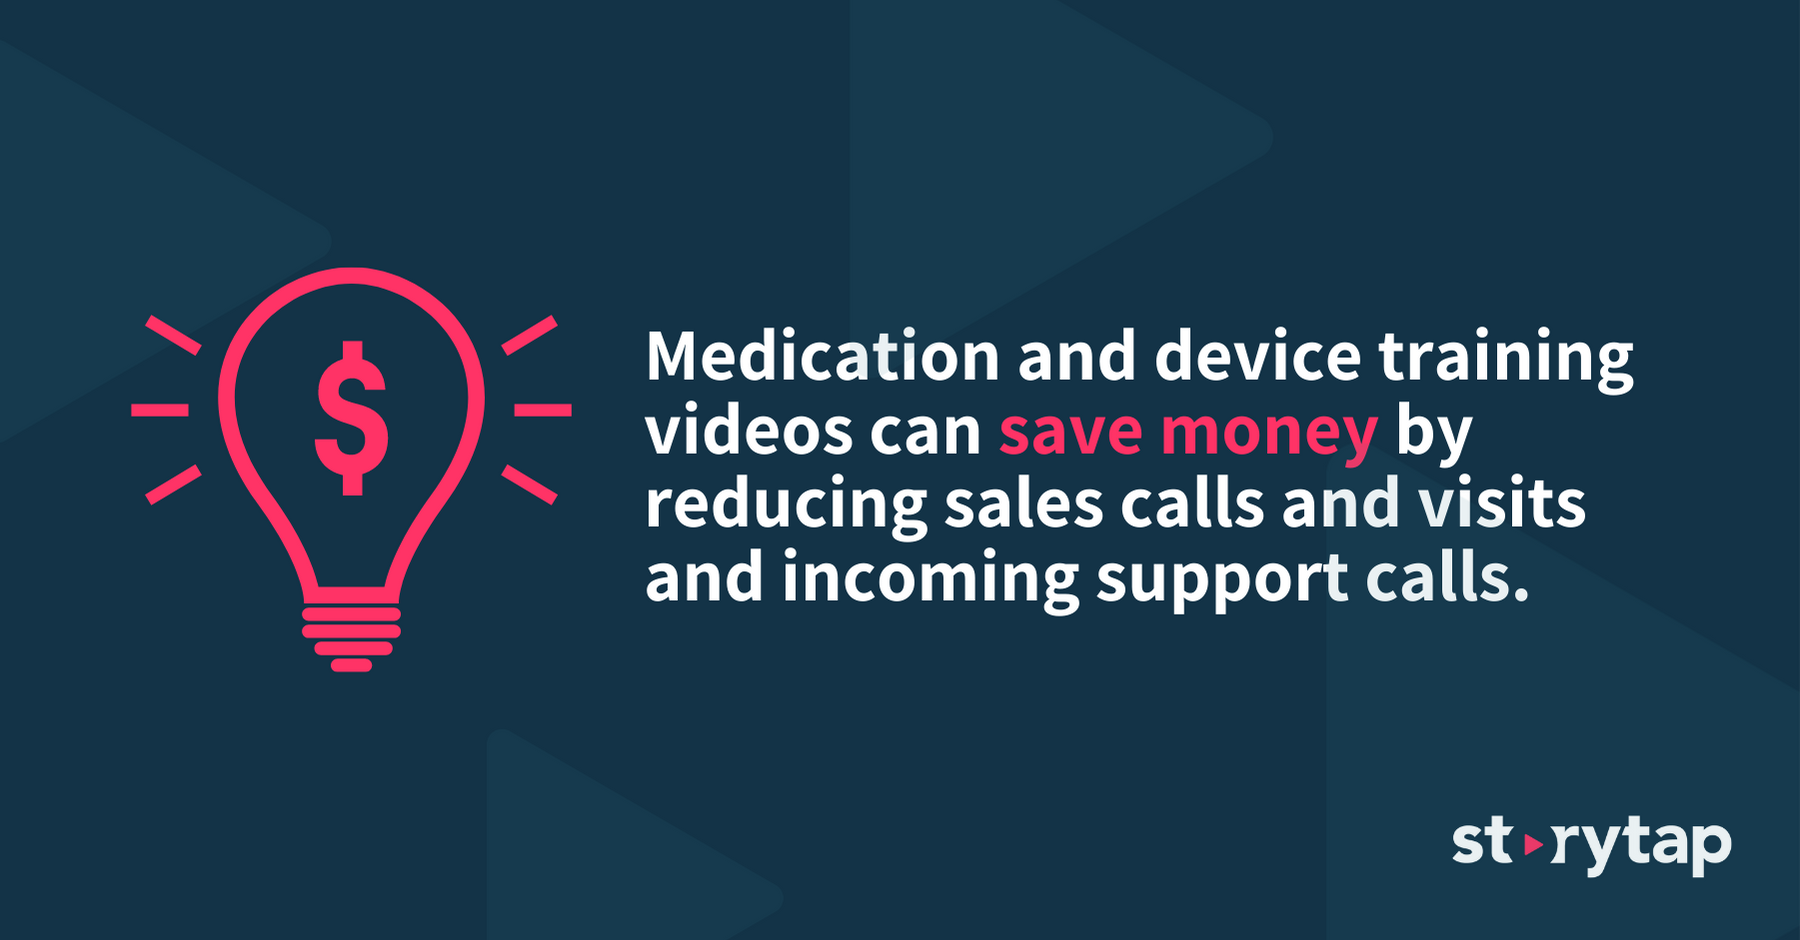 Medication and device training videos can save money by reducing sales calls and visits and incoming support calls.